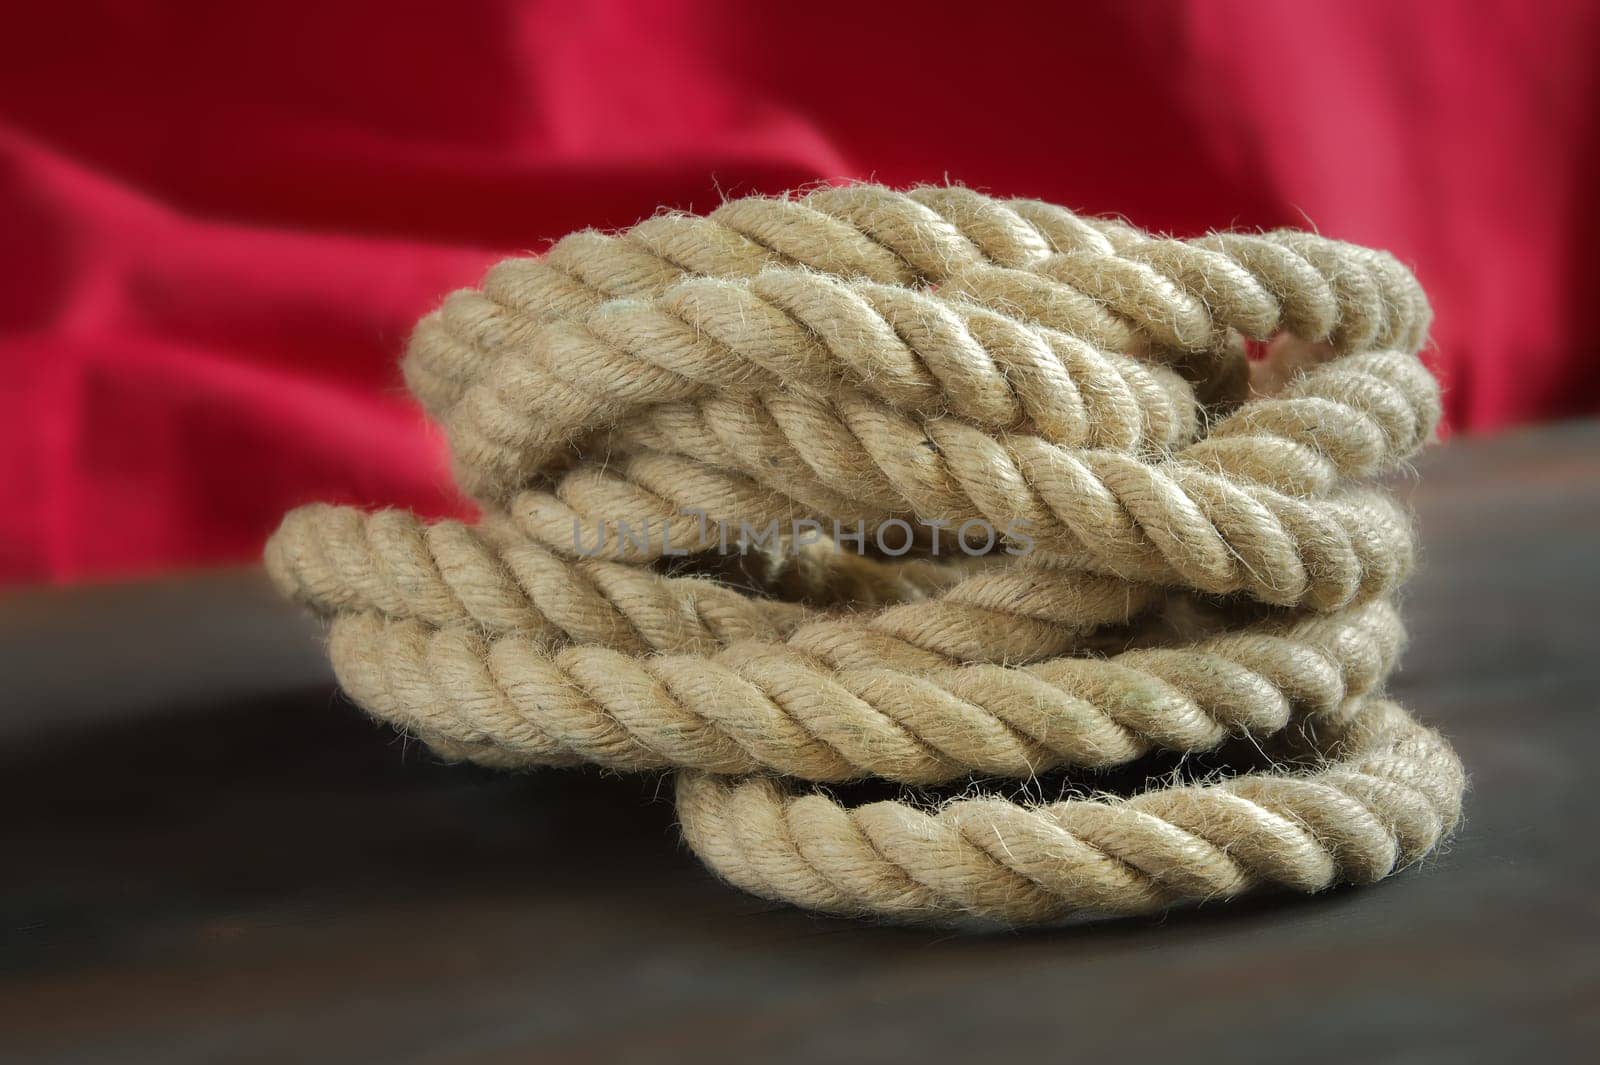 Coil of rope made of hemp or jute, braided texture and consistent thickness with a deep beige color